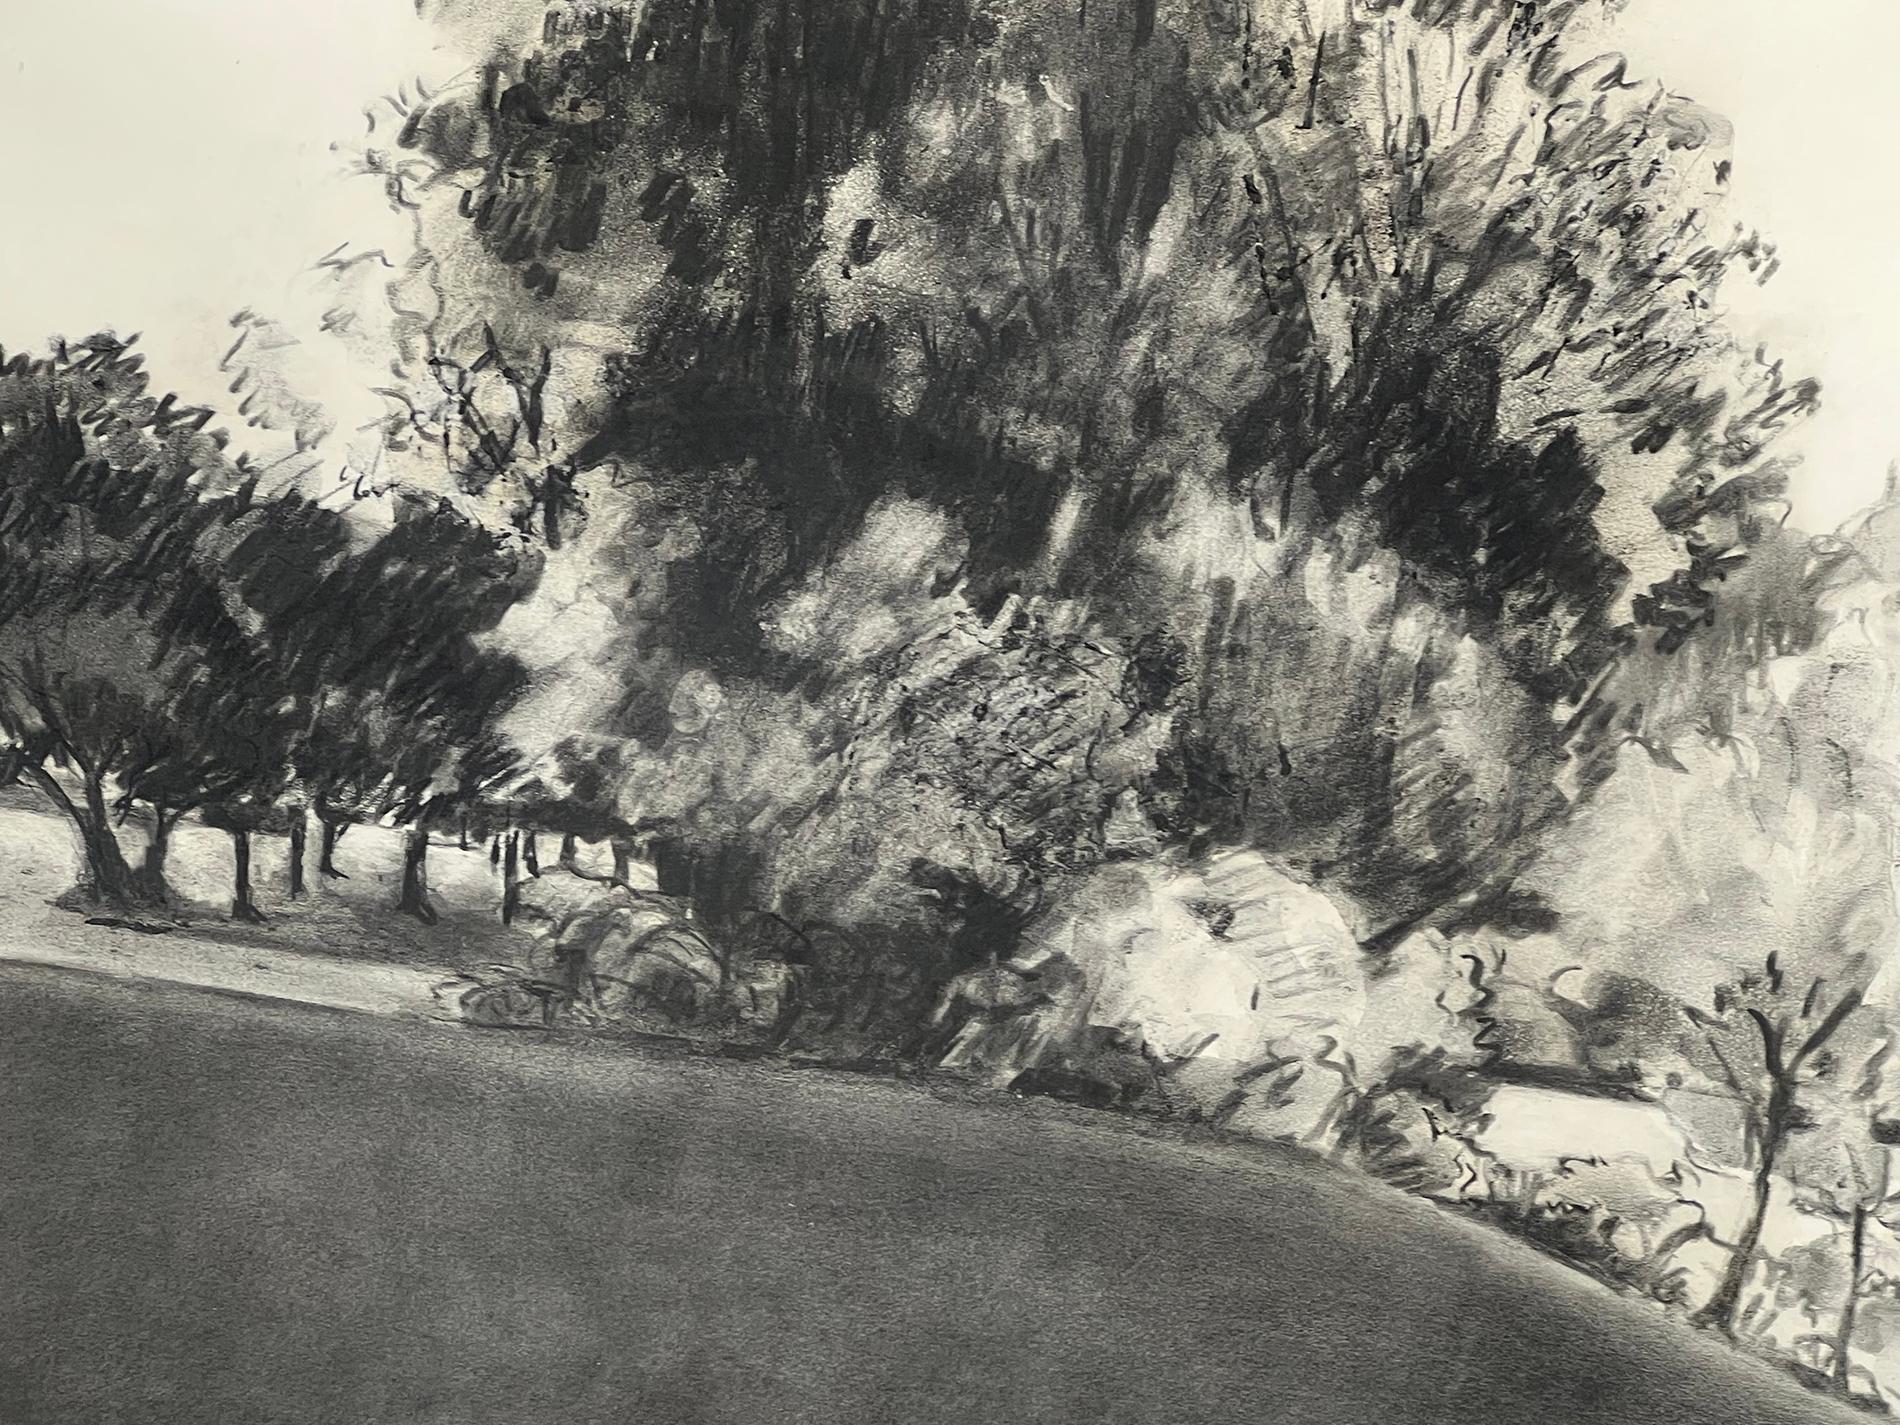 Modern Charcoal on paper: 'The Edge of the Park' Signed 'Liepe '70' For Sale